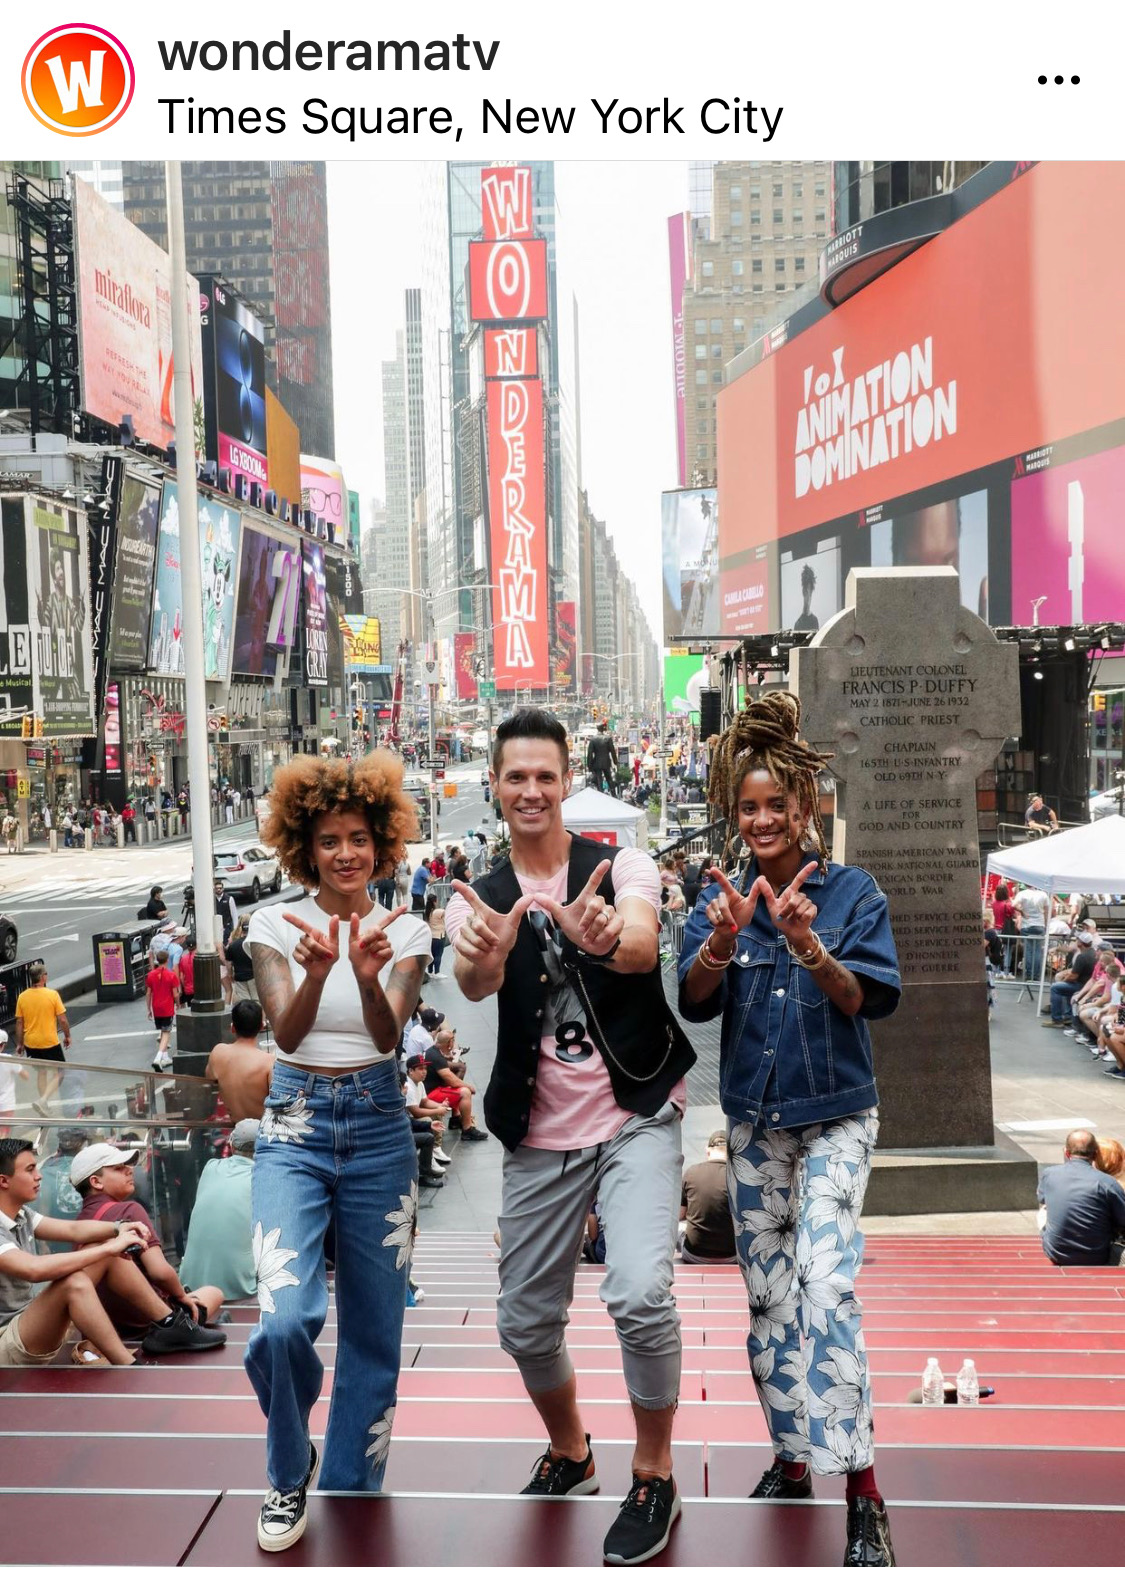 Wonderama ‘World Experience’ Live in Times Square July 25-29